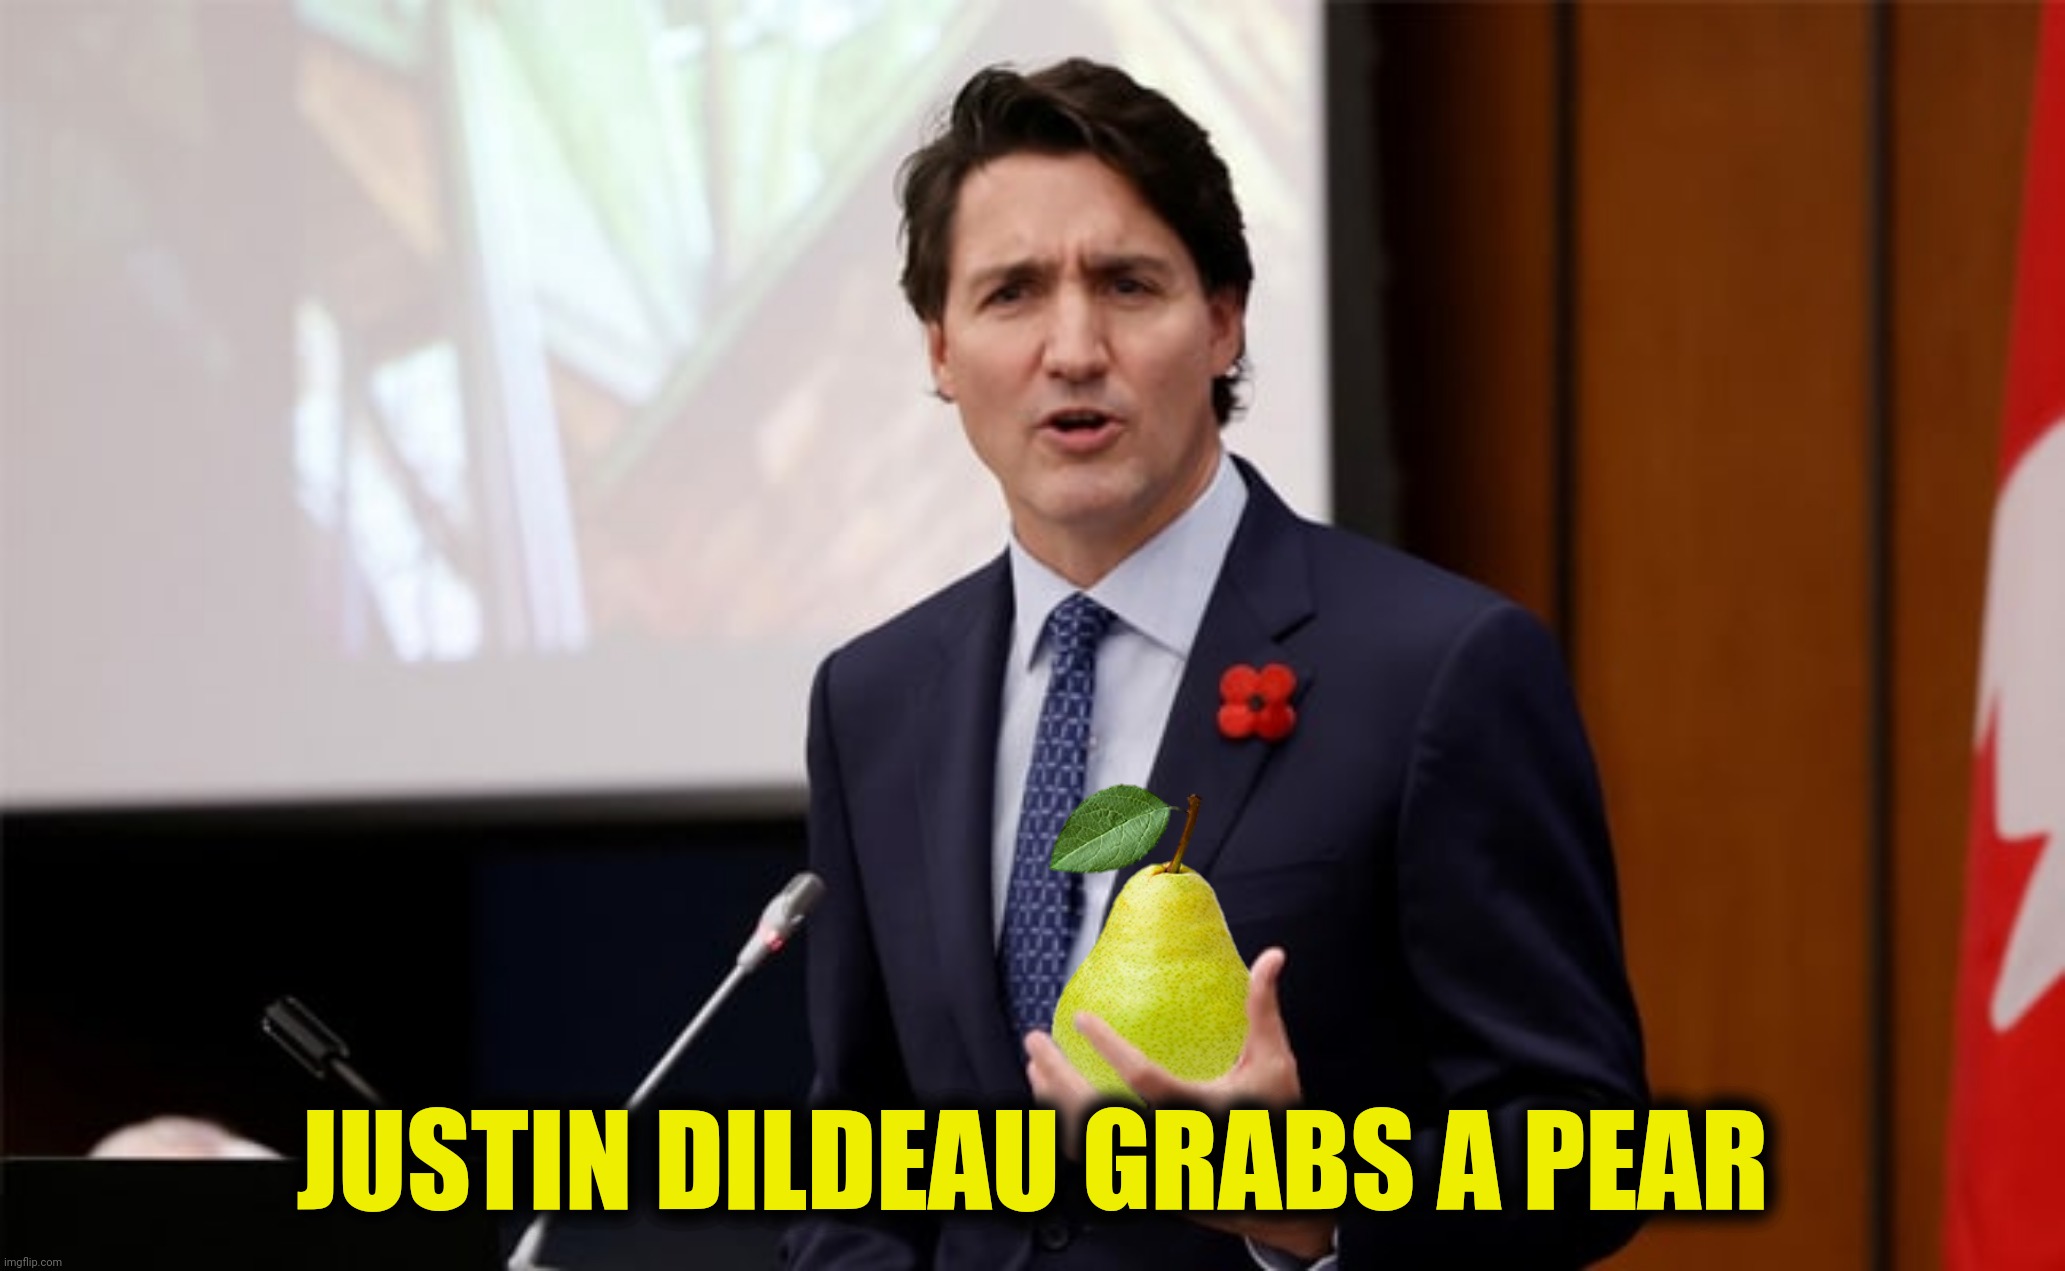 JUSTIN DILDEAU GRABS A PEAR | made w/ Imgflip meme maker